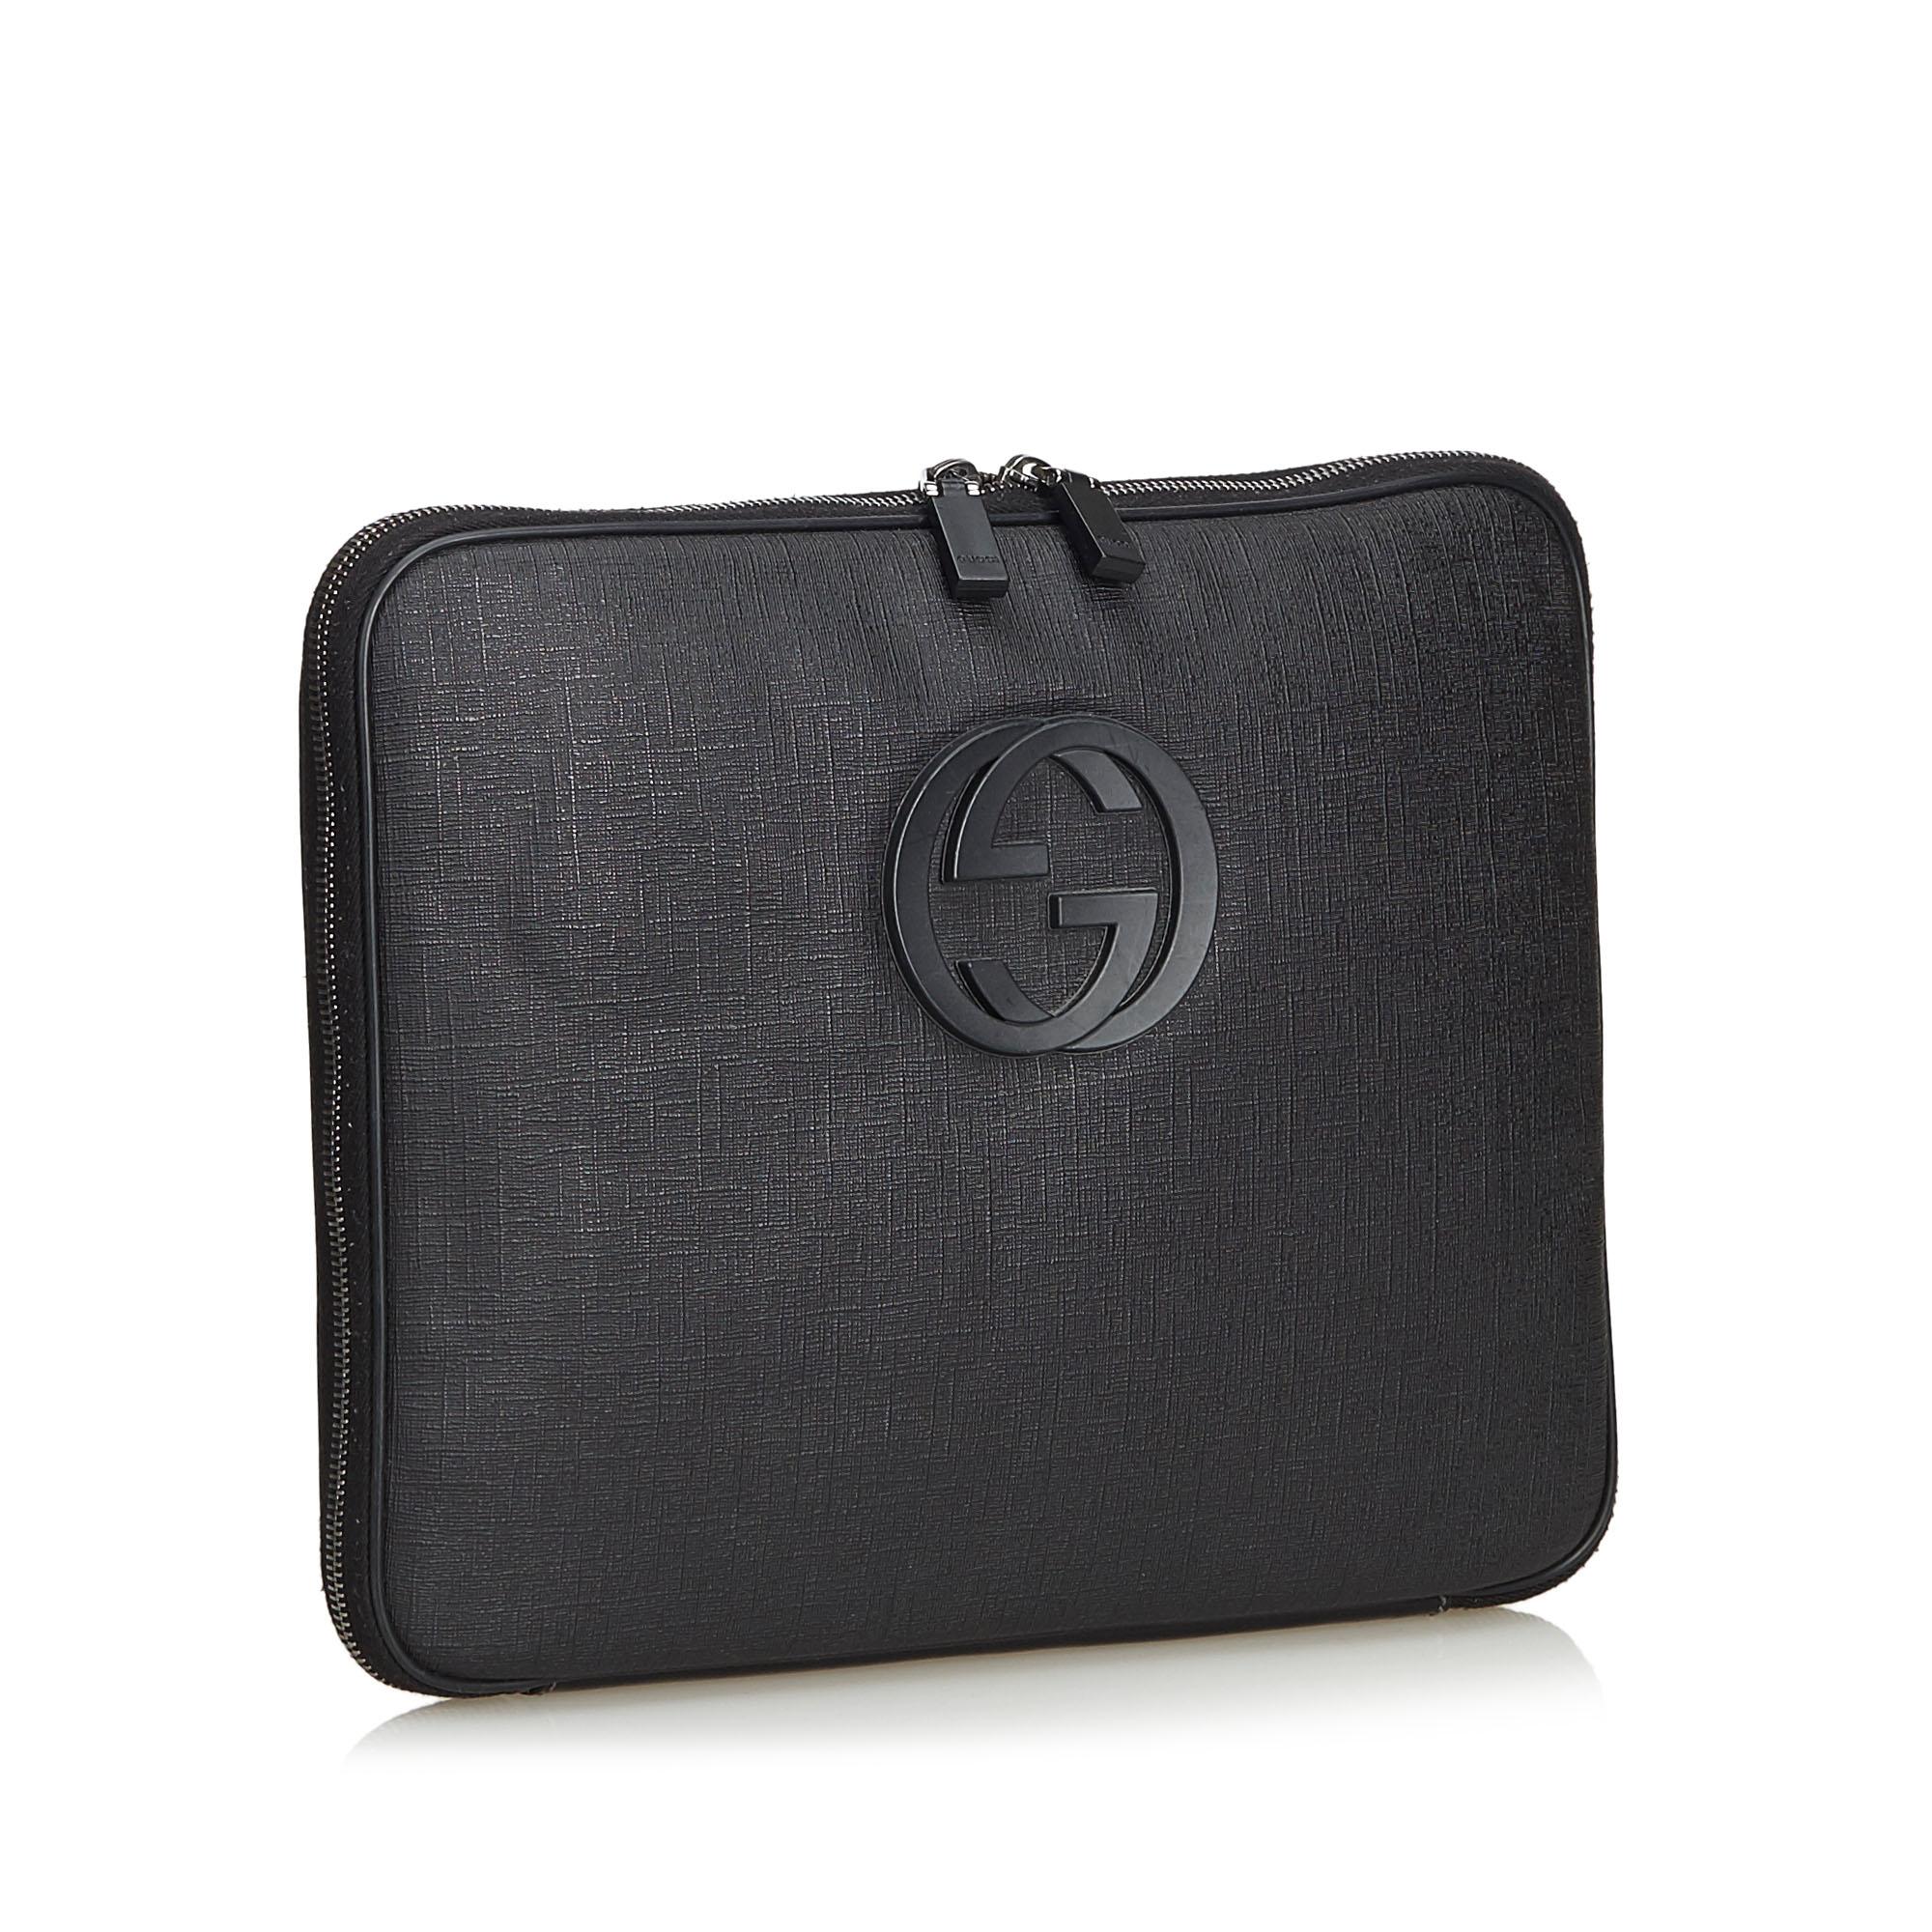 The Double G laptop bag features a PVC body, with a wrap around zip closure. It carries as A condition rating.

Inclusions: 
This item does not come with inclusions.

Dimensions:
Length: 26.00 cm
Width: 32.00 cm
Depth: 2.00 cm

Material: Plastic x